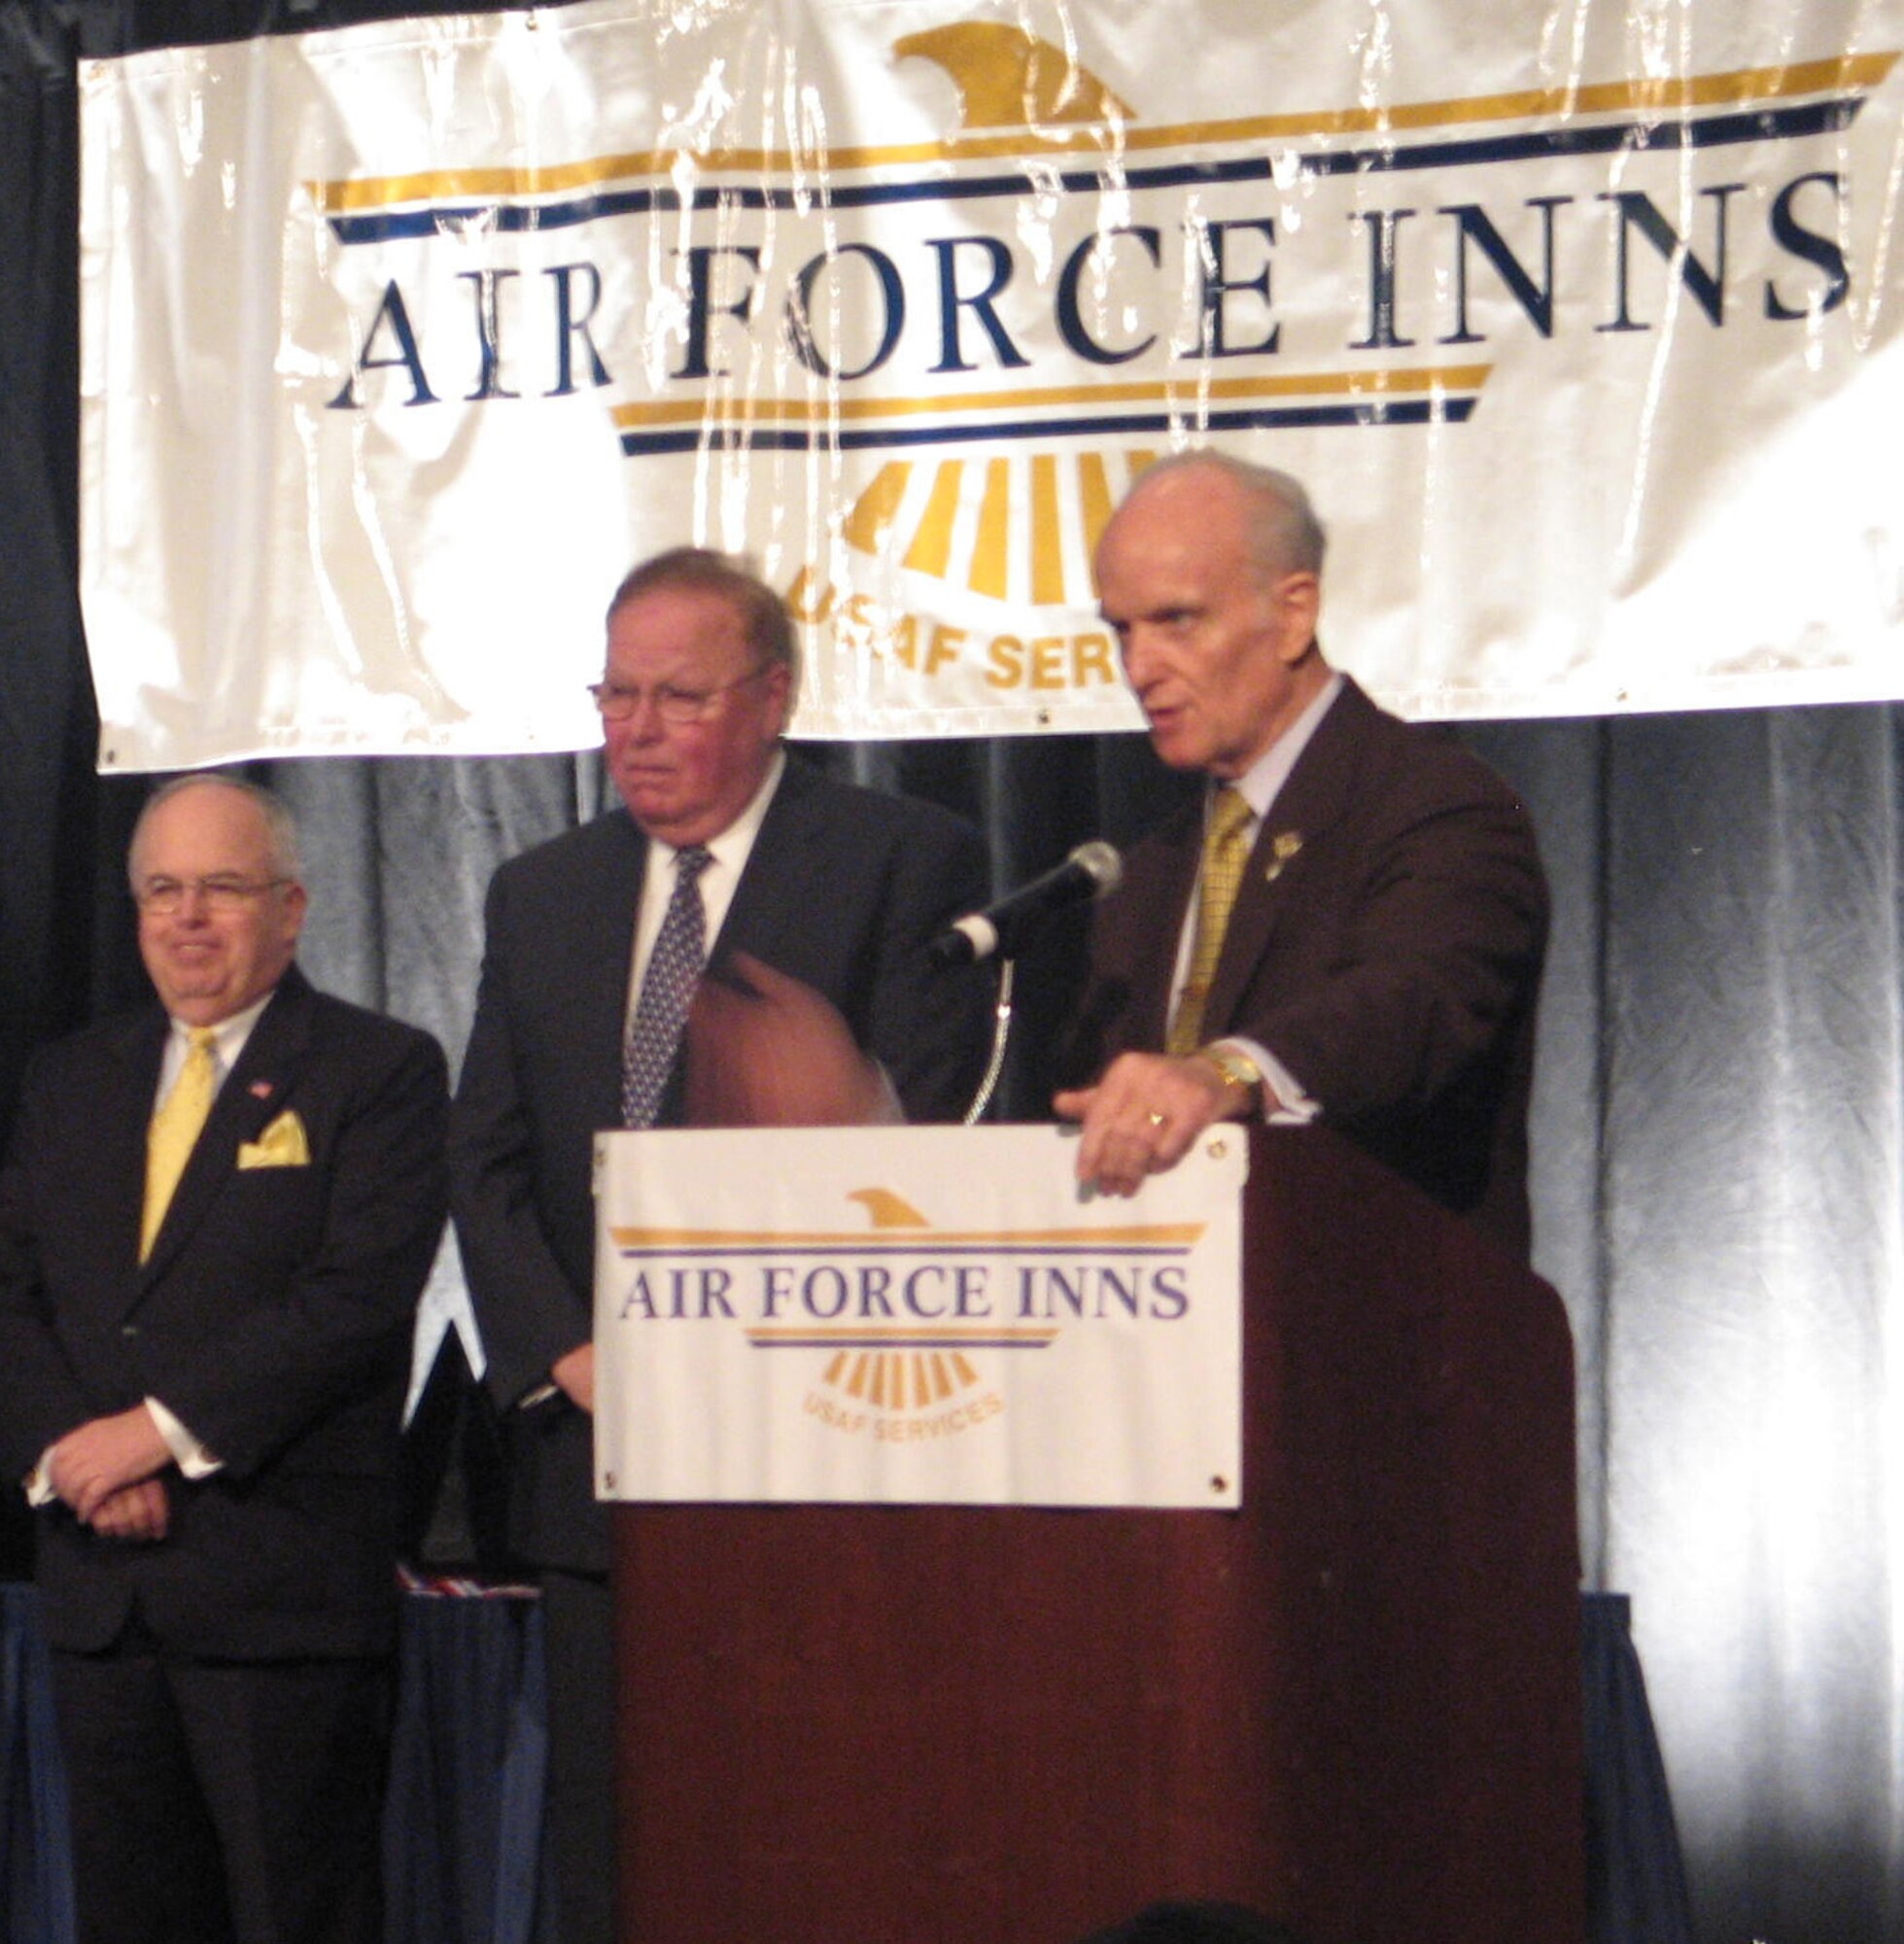 Art Myers, Air Force Services director, speaks at the annual Air Force Innkeeper Awards, November 2008, at the International Hotel/Motel Restaurant Show, New York City, NY, before presenting the Commander's Award for Public Service to Joseph McInerney and Joseph Spinnato. Mr. McInerney is president and chief executive officer of the American Hotel & Lodging Association and Mr. Spinnato is president and CEO of the Hotel Association of New York City, Inc. (Photo courtesy Military Club & Hospitality)